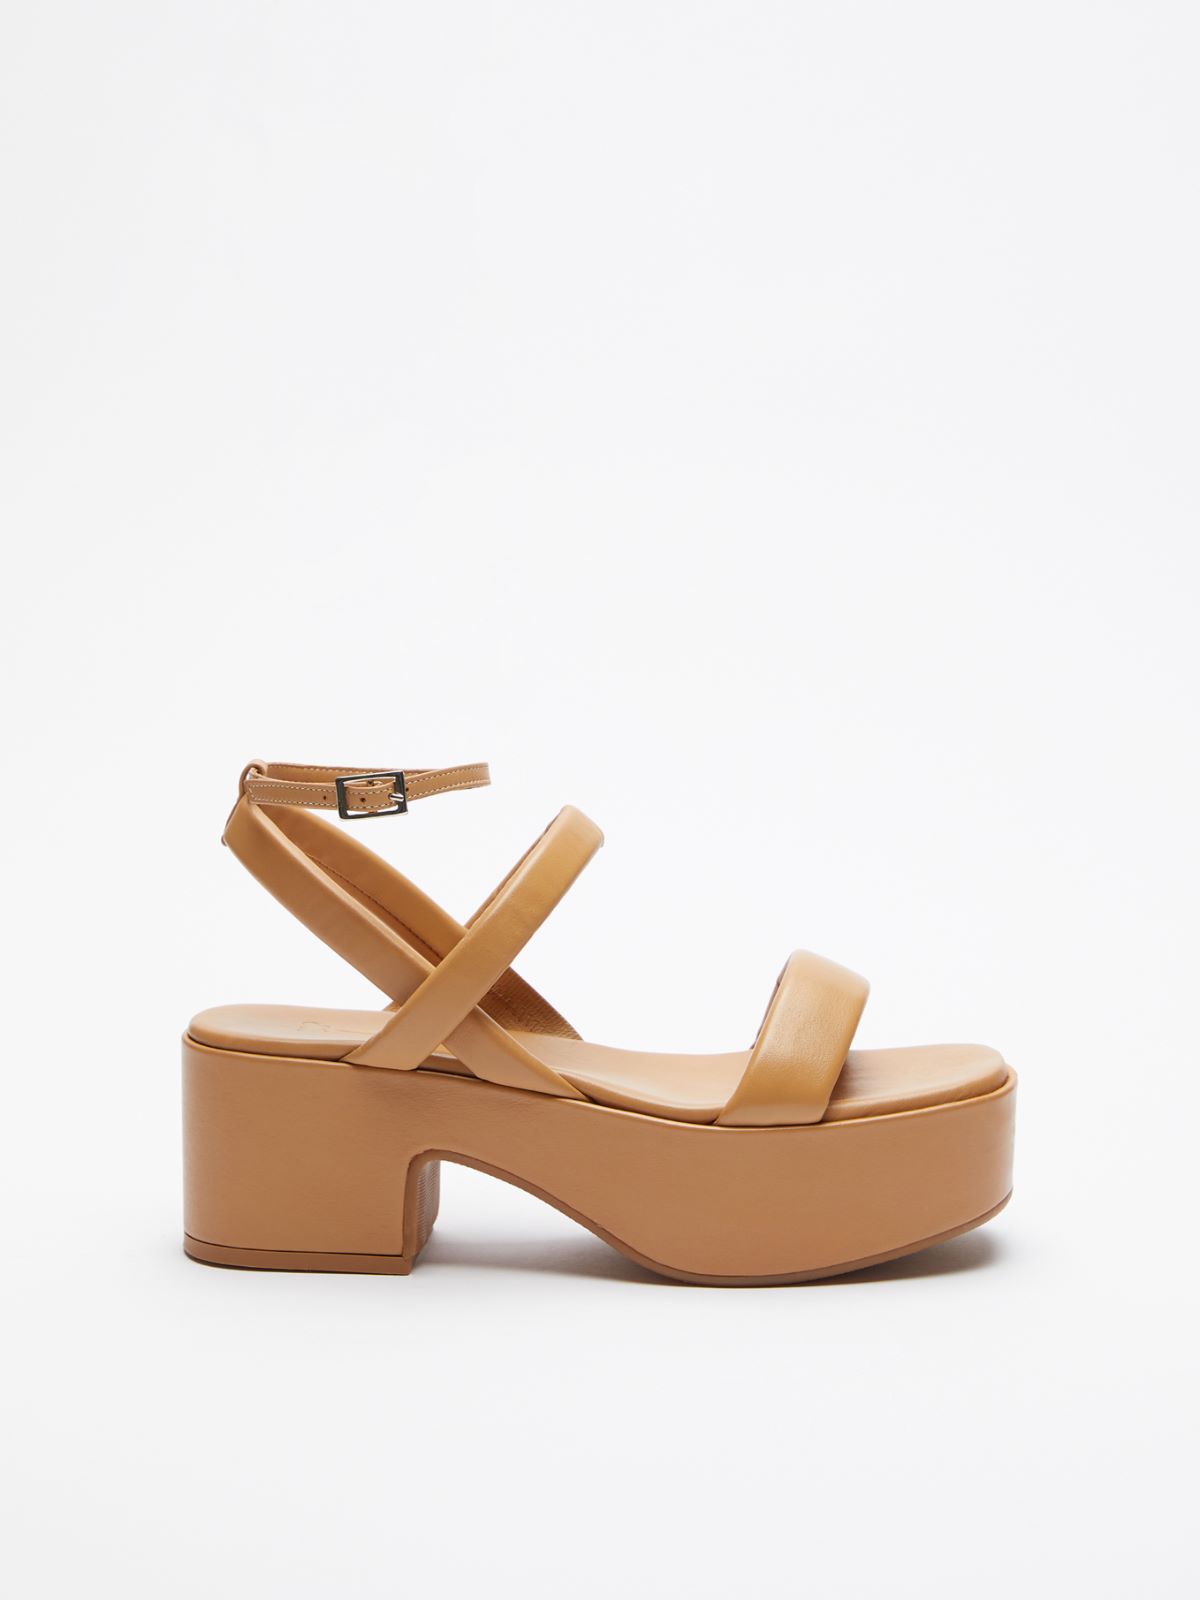 Sandals in nappa leather - NATURAL - Weekend Max Mara